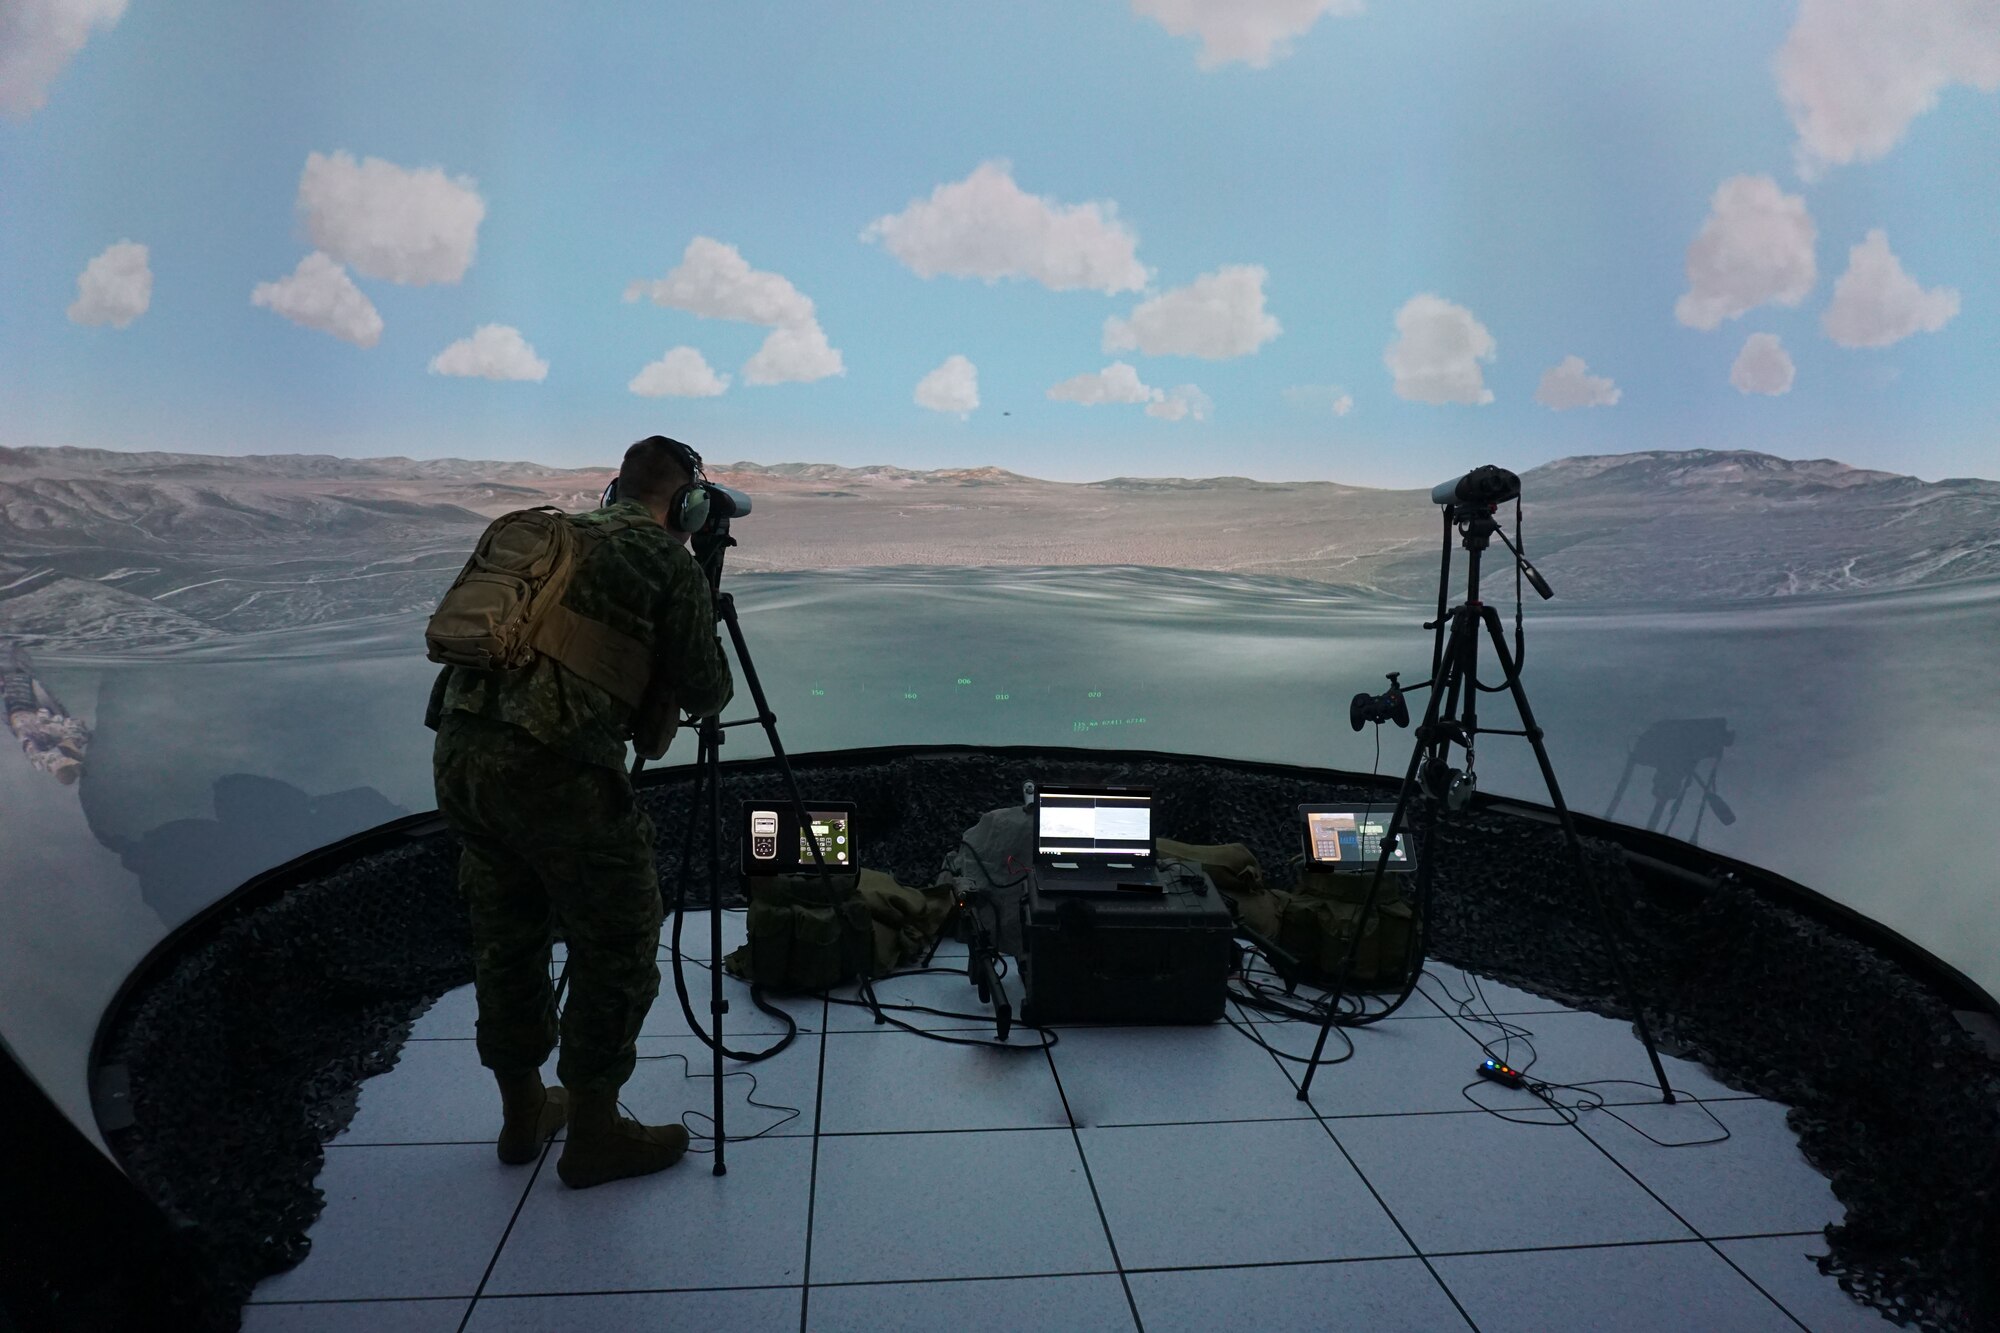 photo of man standing in virtual environment